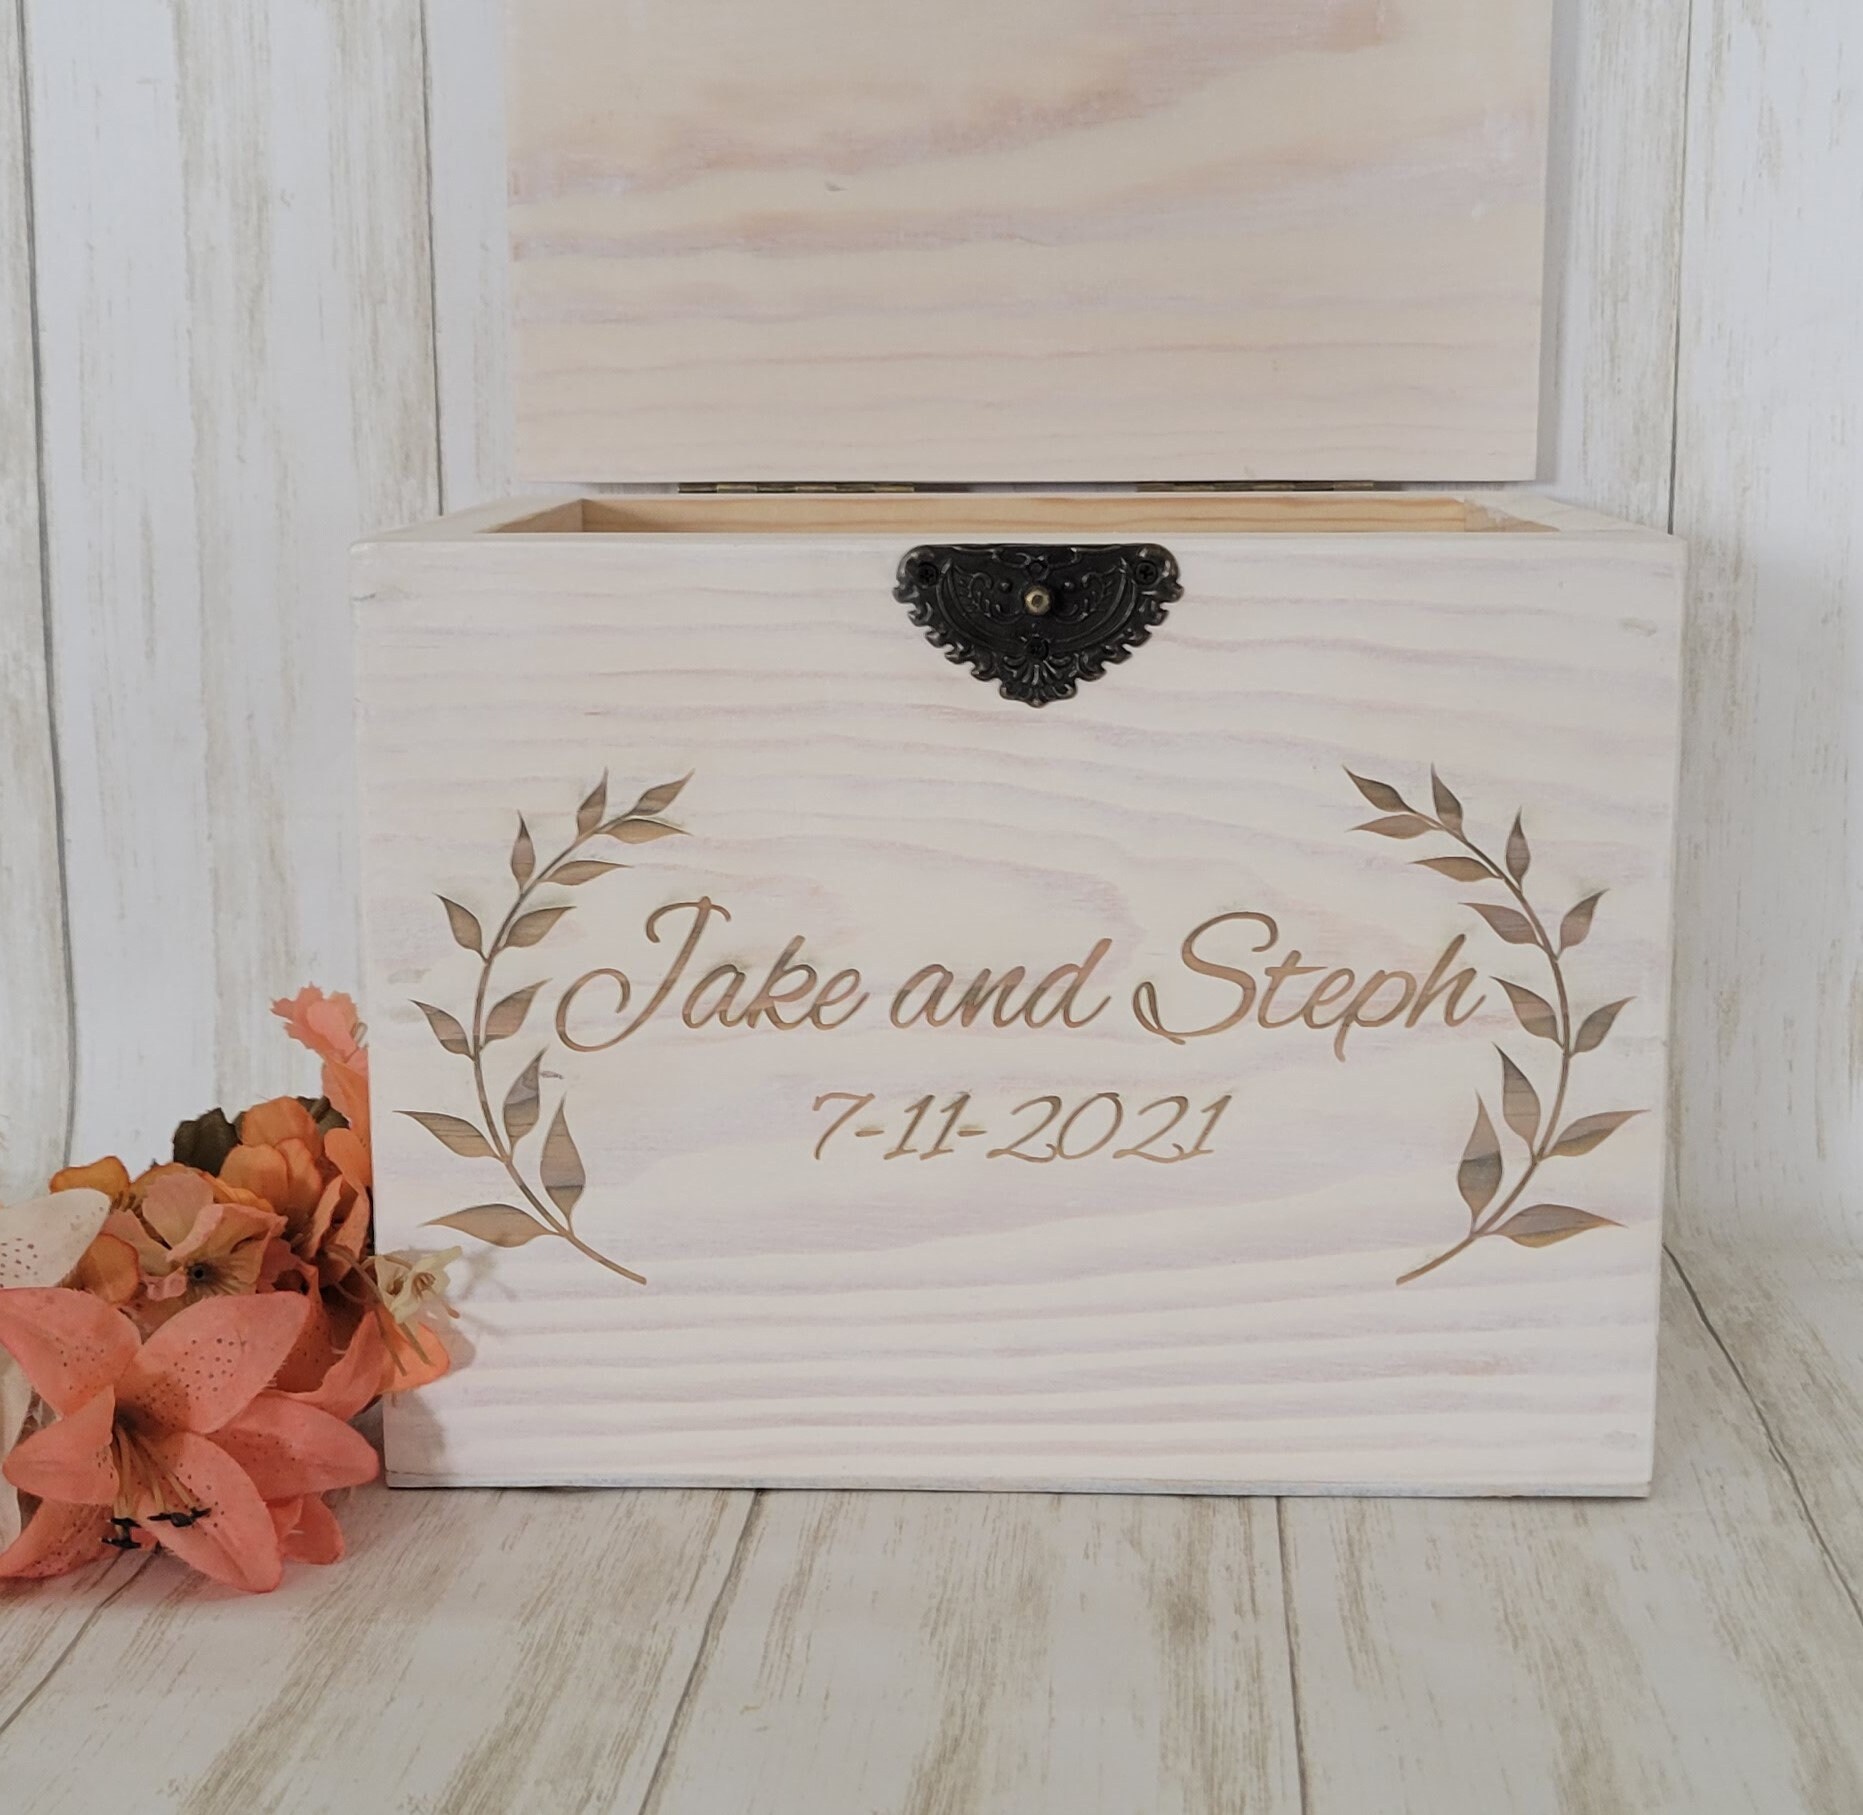 1set Wood Wedding Card Box With Lock And Cards Sign, Card Box For